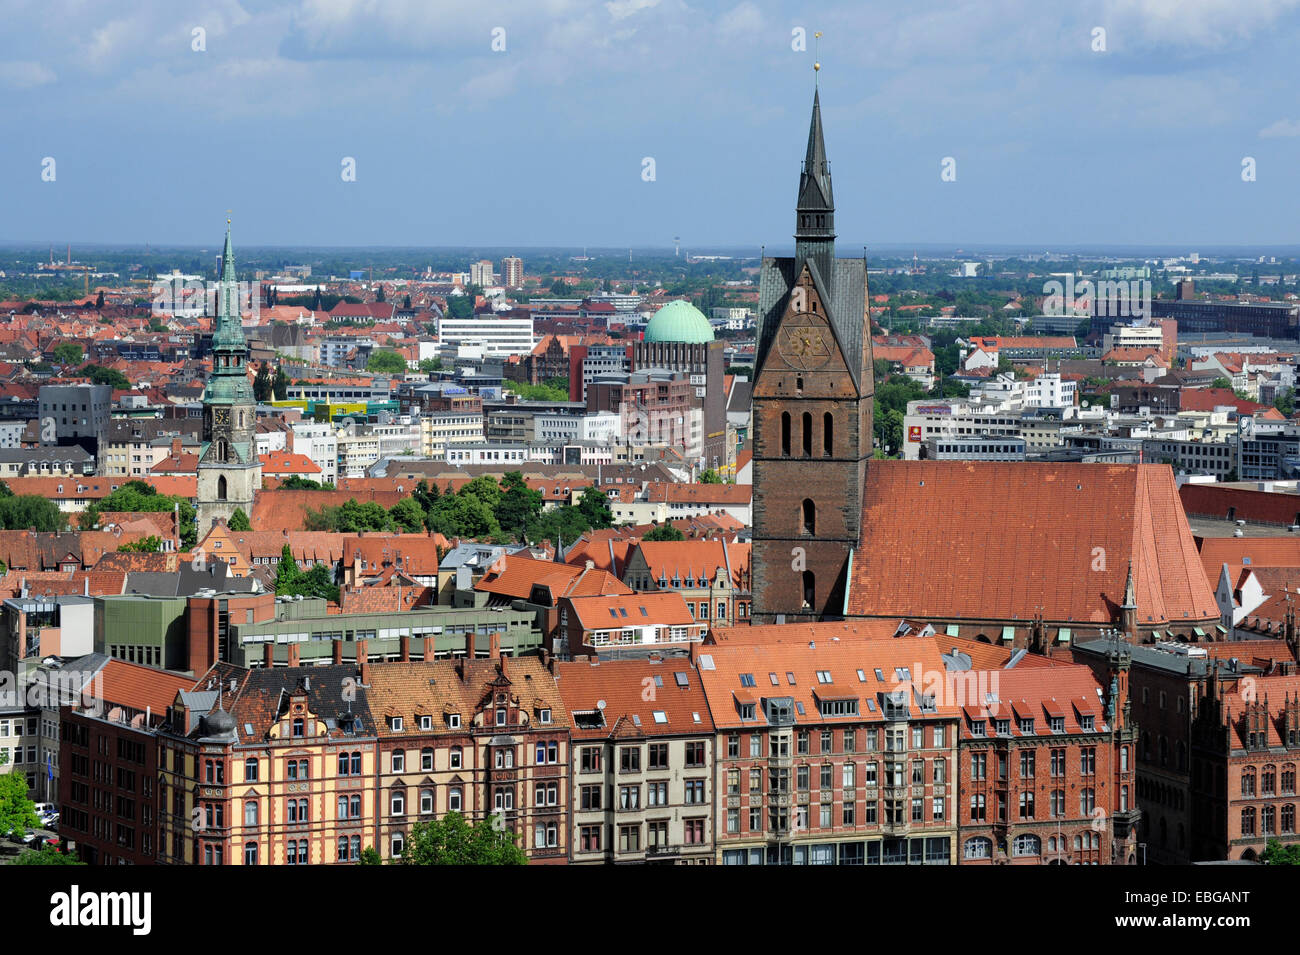 Historic town centre with the Marktkirche or Market Church, Hannover, Lower Saxony, Germany Stock Photo